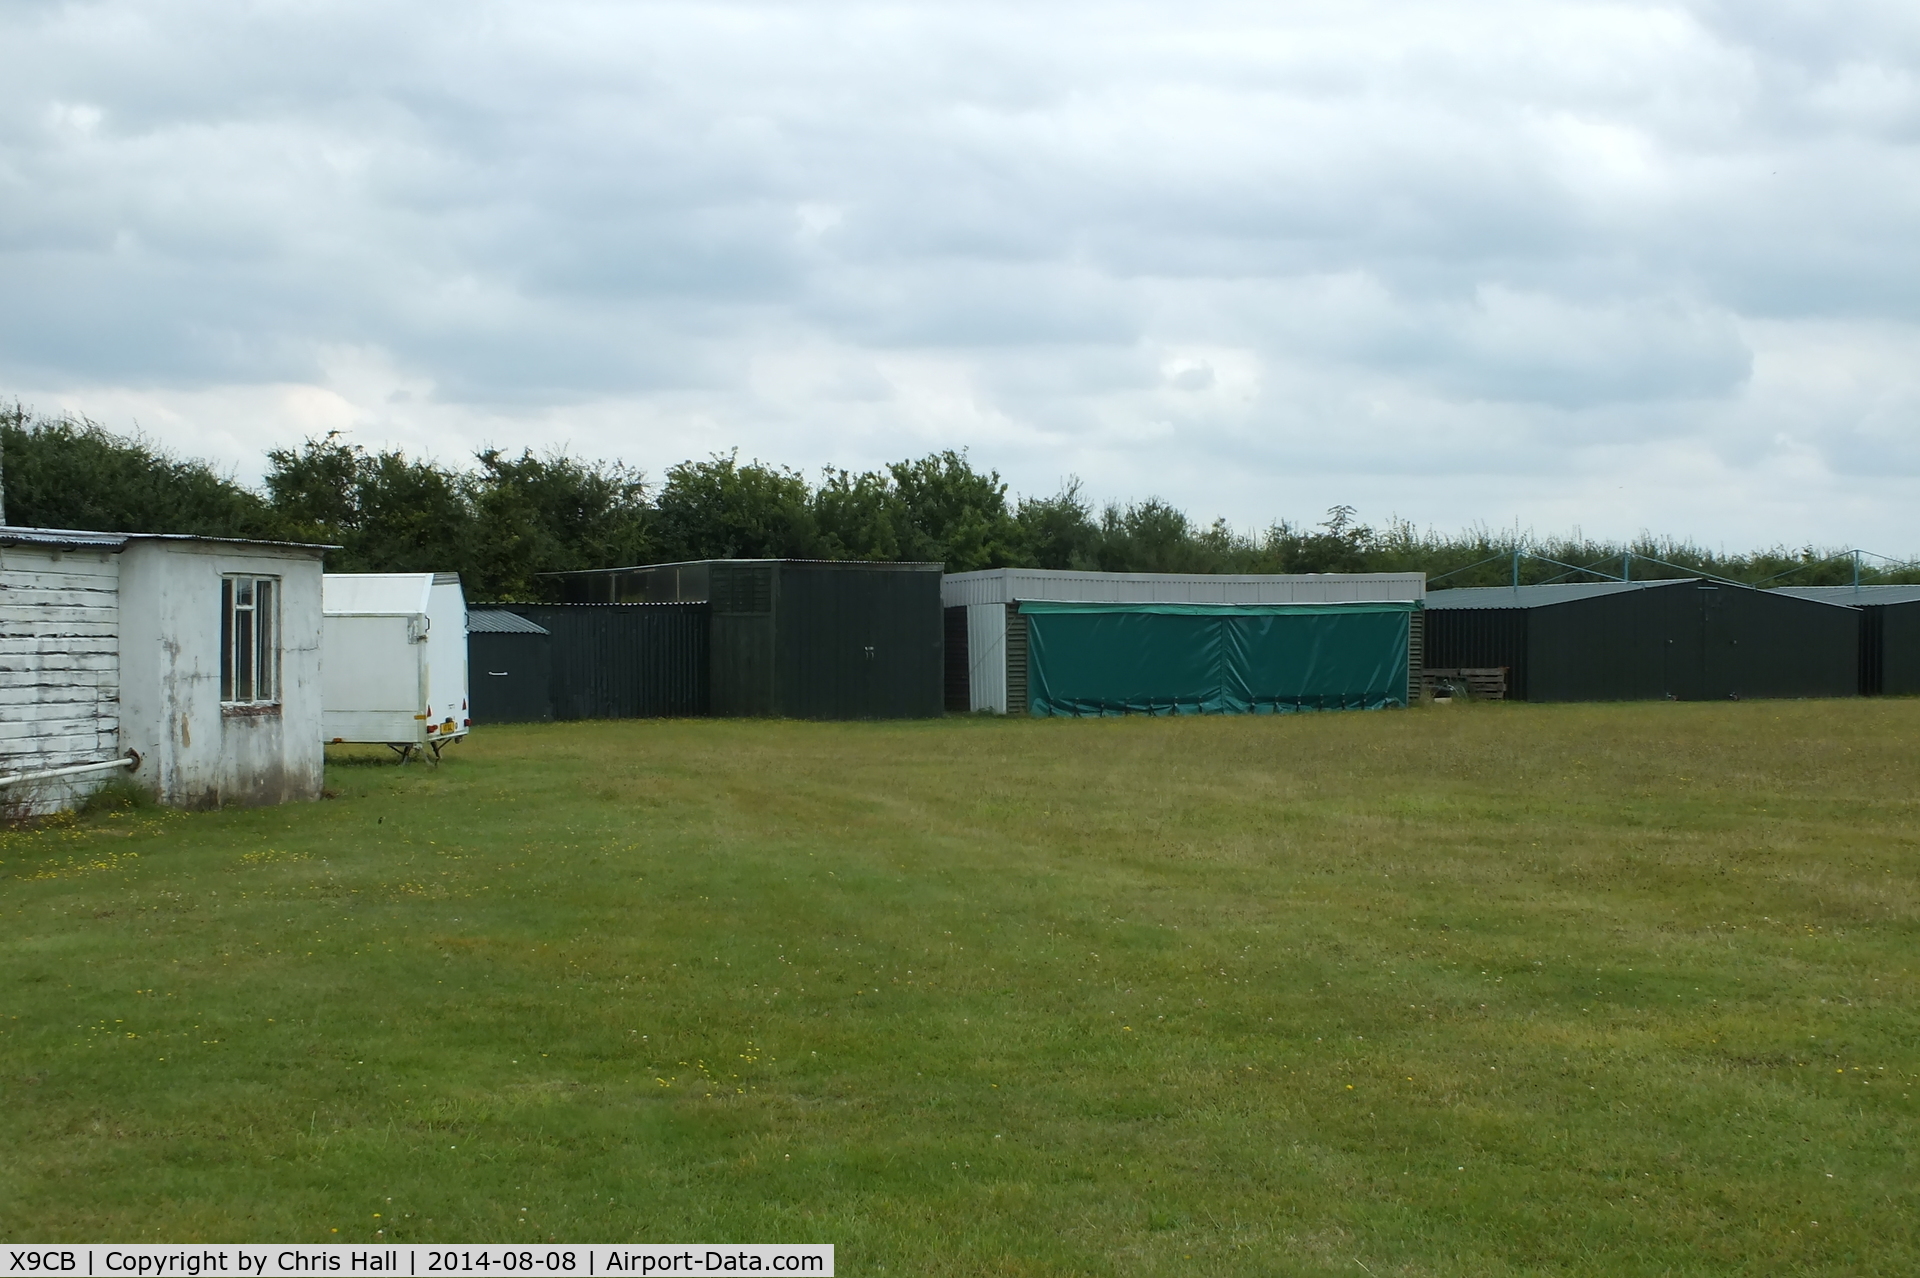 X9CB Airport - Stonefield Park airfield which is on part of the former RAF Chilbolton 